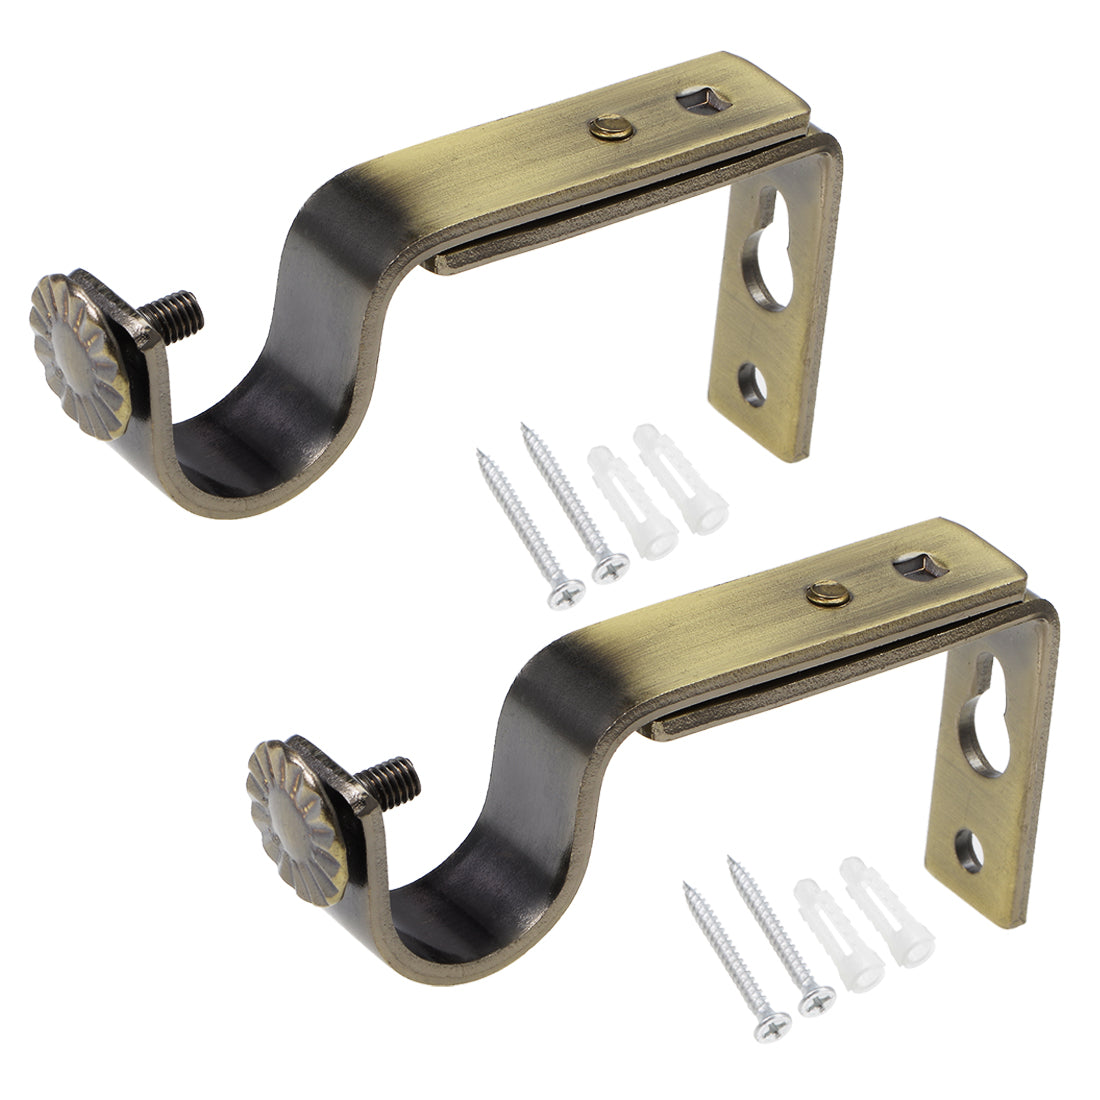 uxcell Uxcell Curtain Rod Bracket Iron Single Holder Support for 22mm Drapery Rod, 94 x 46 x 16mm Bronze Tone 2Pcs